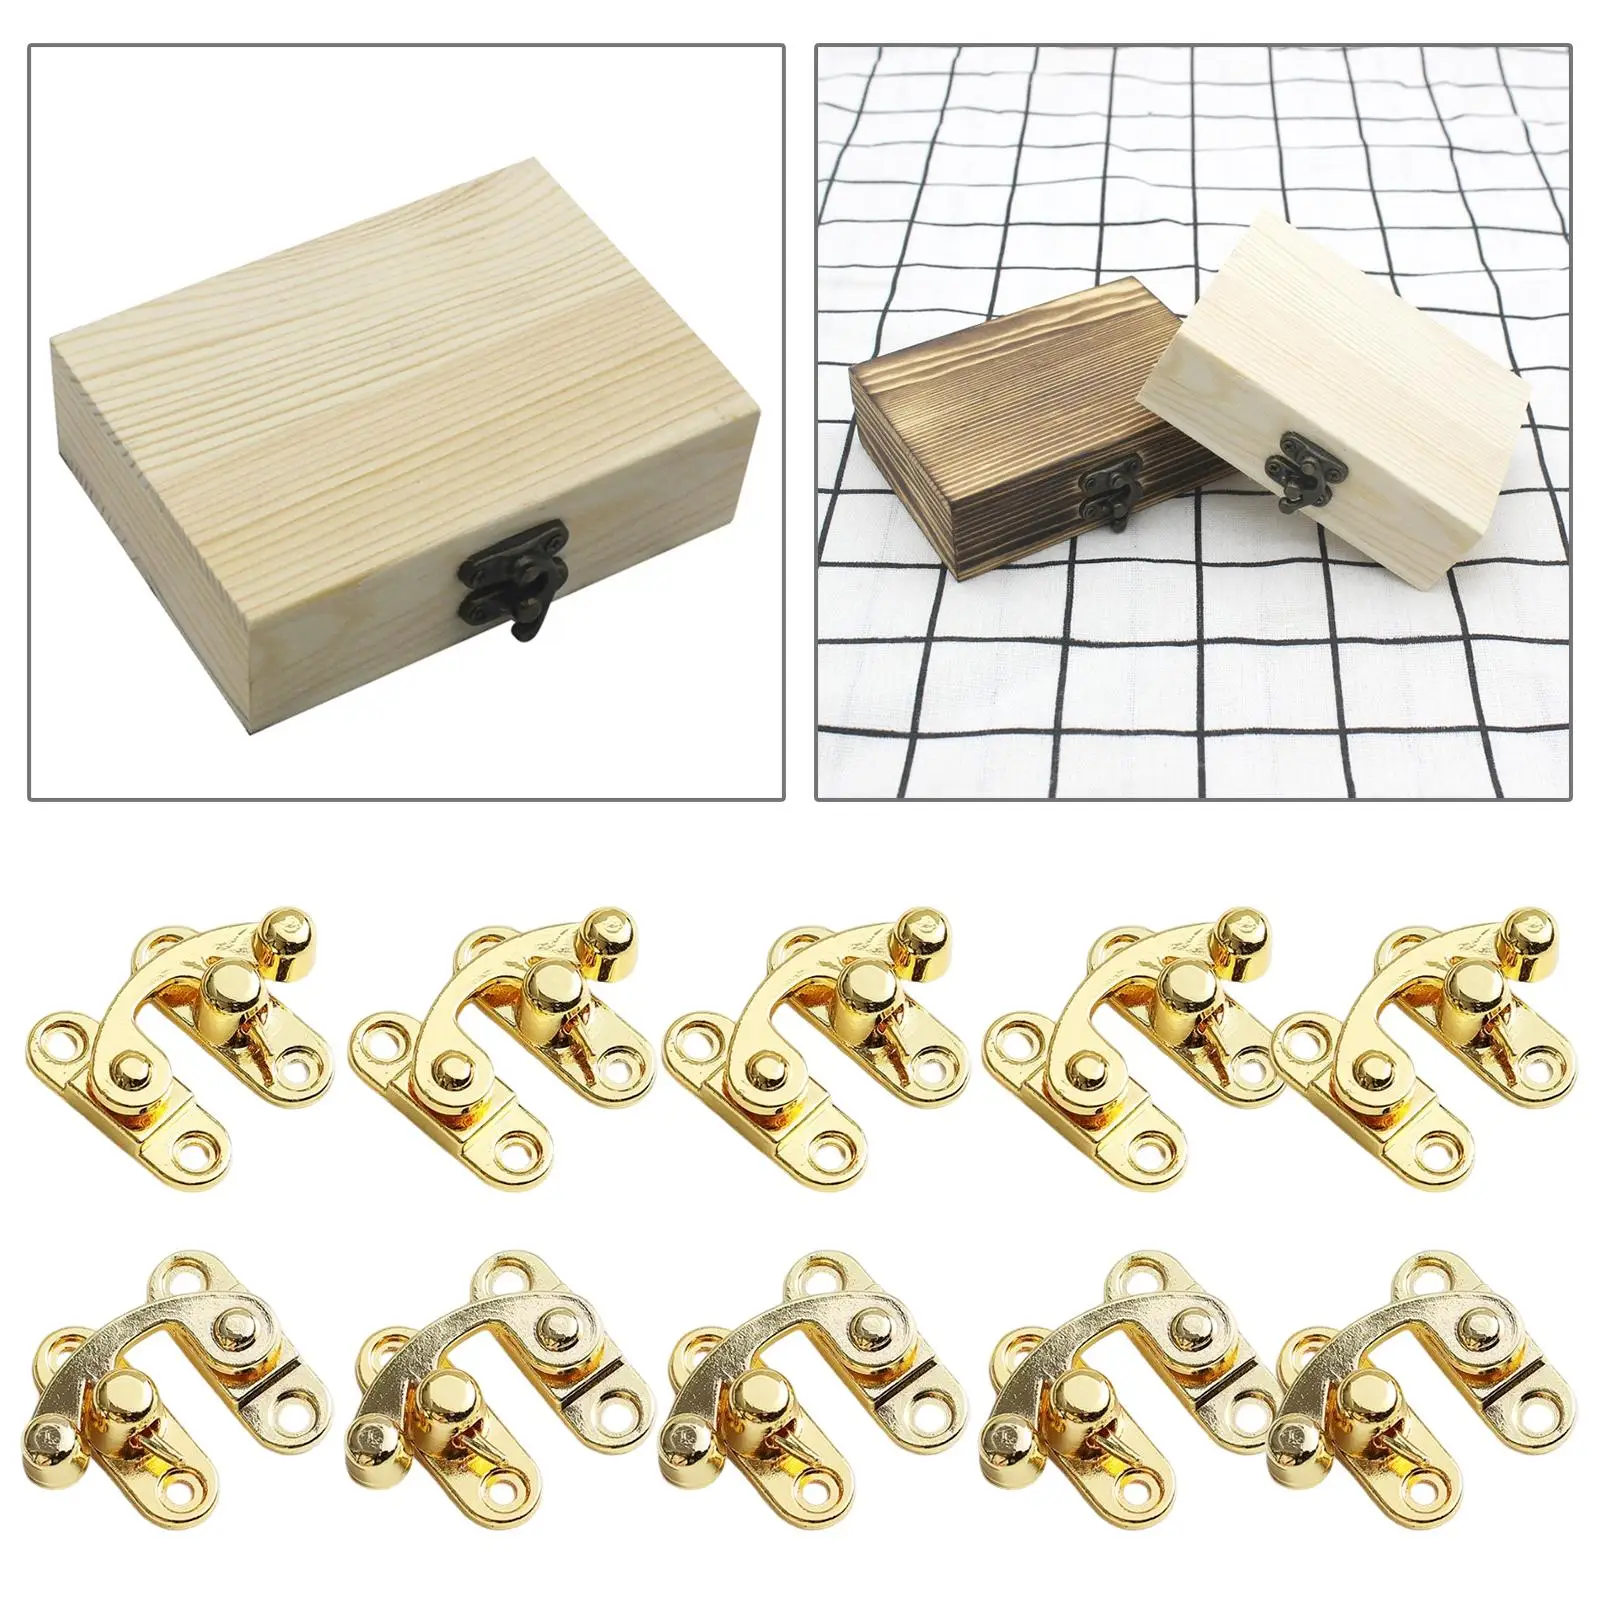 10x  Hasp Horn Lock Latch Buckle Clasp Latch  Left Right Toggle Hardware for Toolbox Suitcase Wood Jewelry Box Decoration